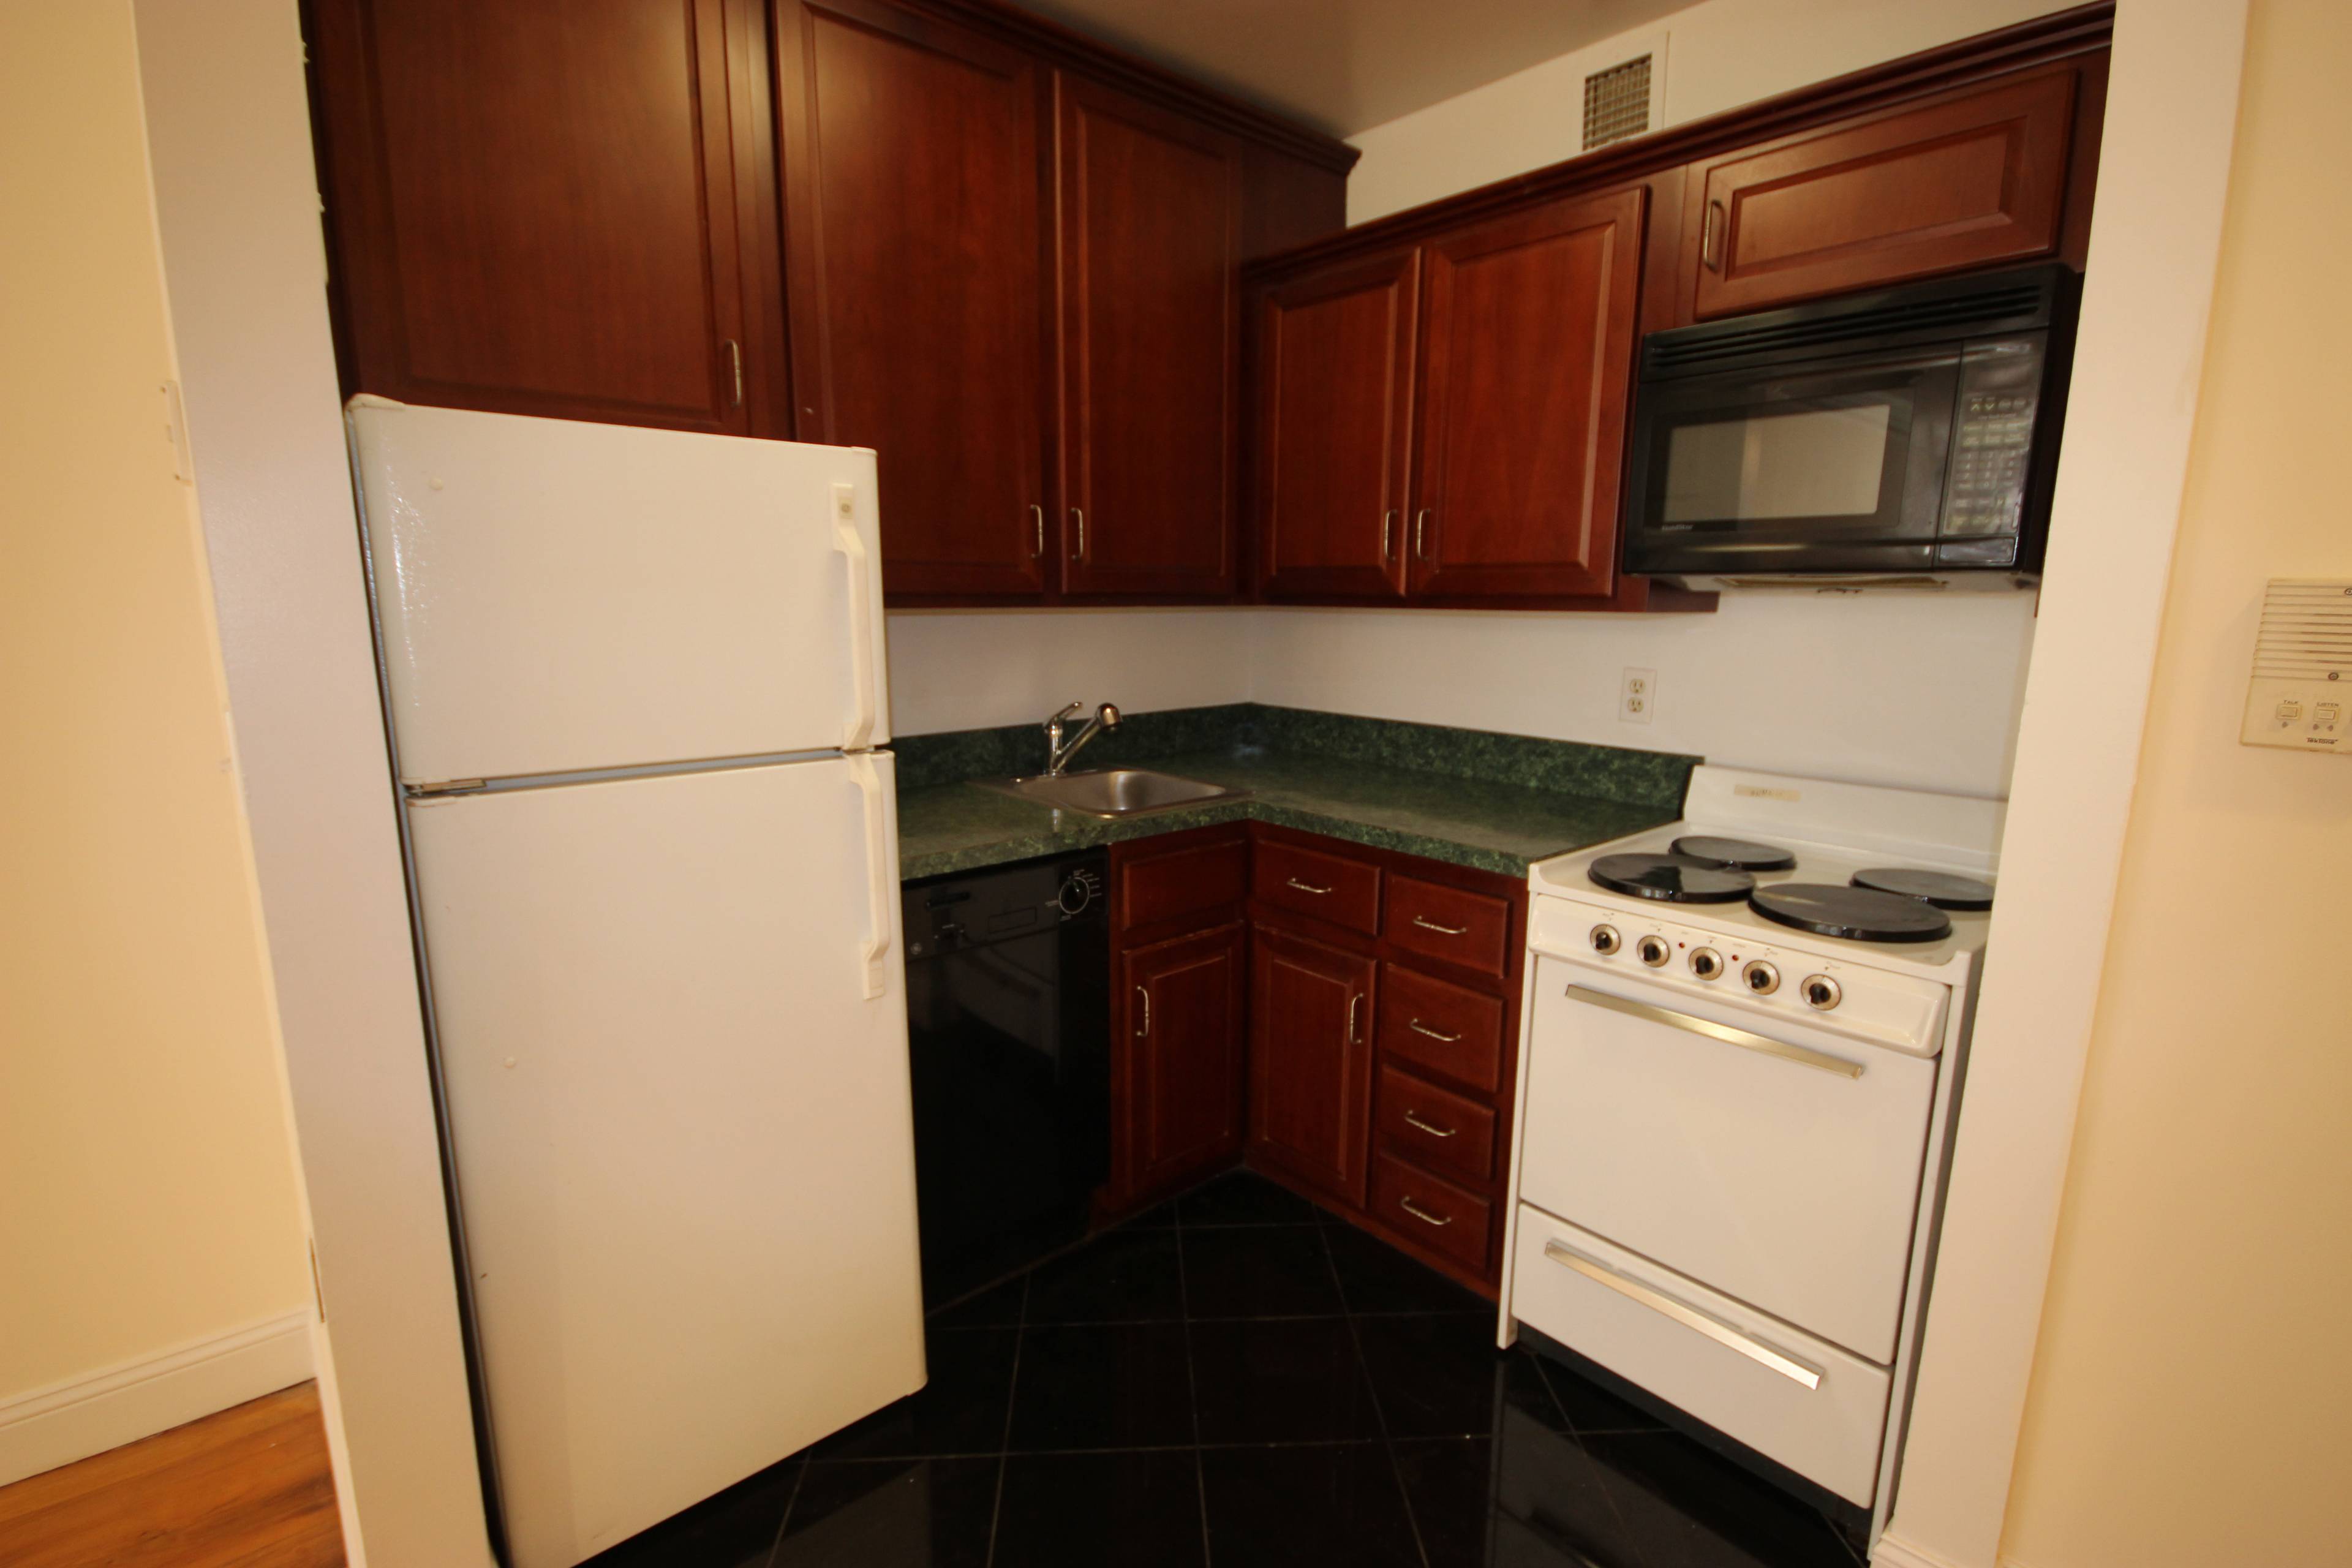 Large One Bedroom Apartment for Rent in Hells Kitchen - Wont Last Long!!